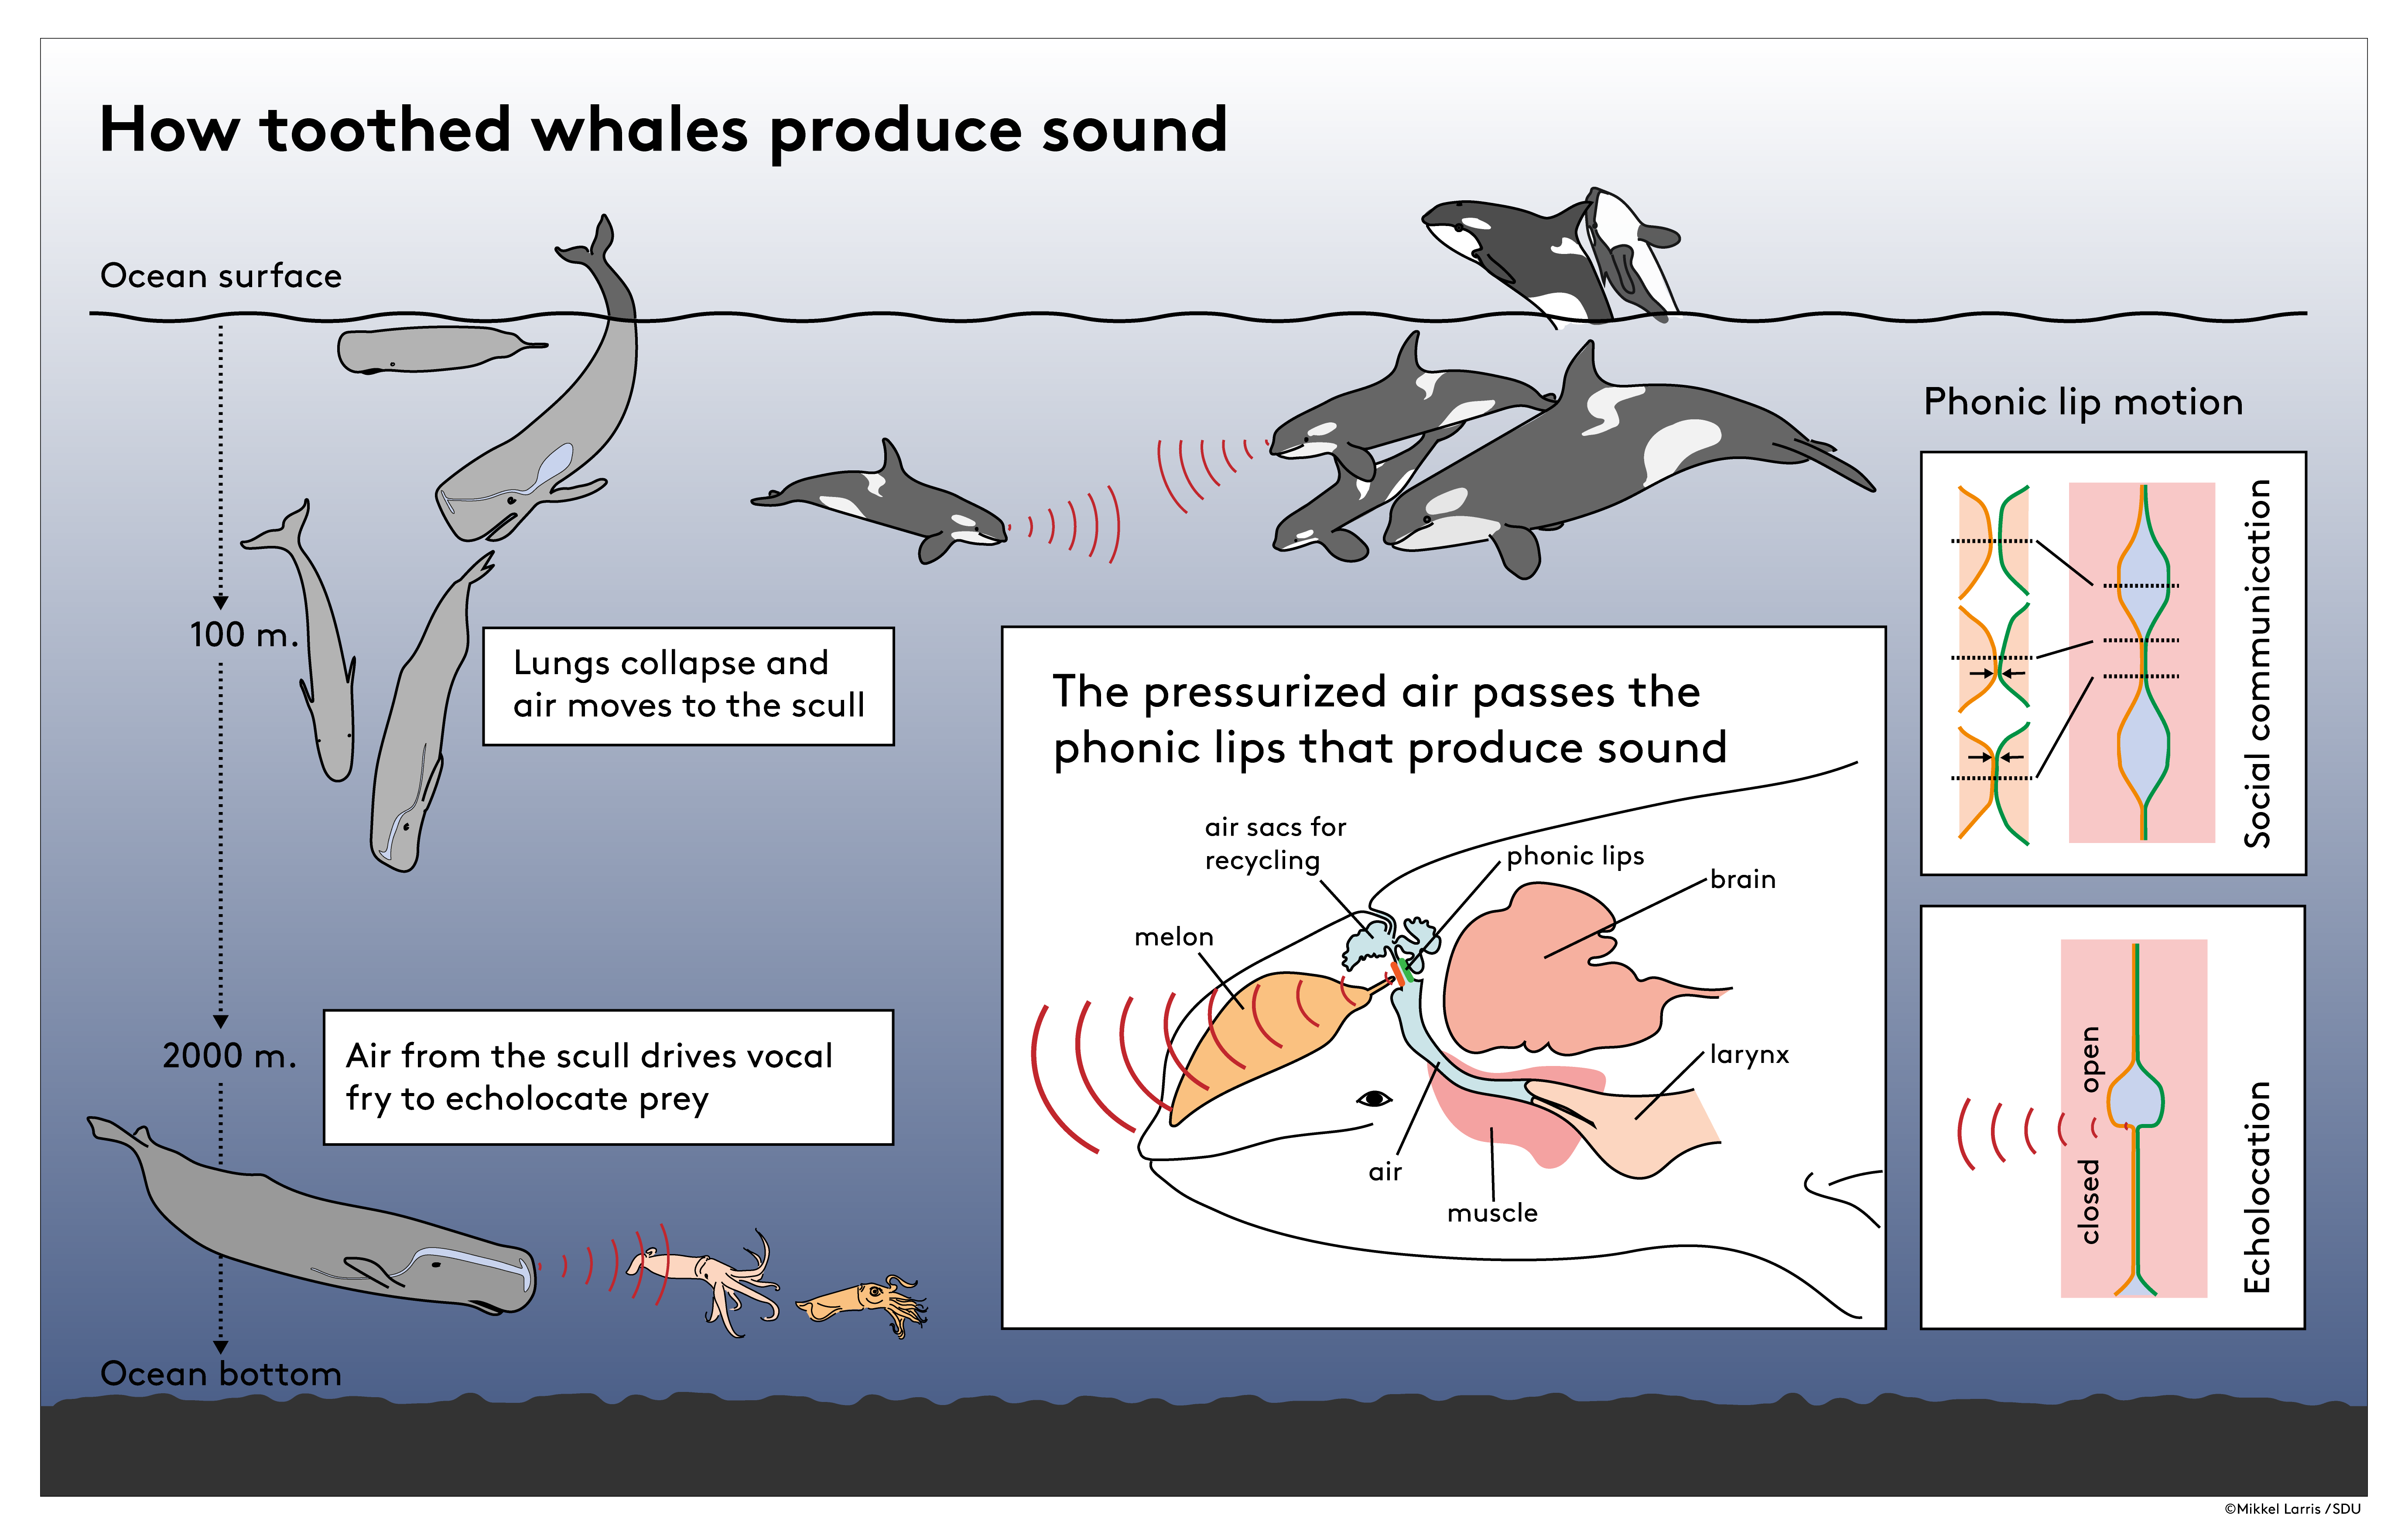 Toothed whales turned their vocal fry into a hunting superpower